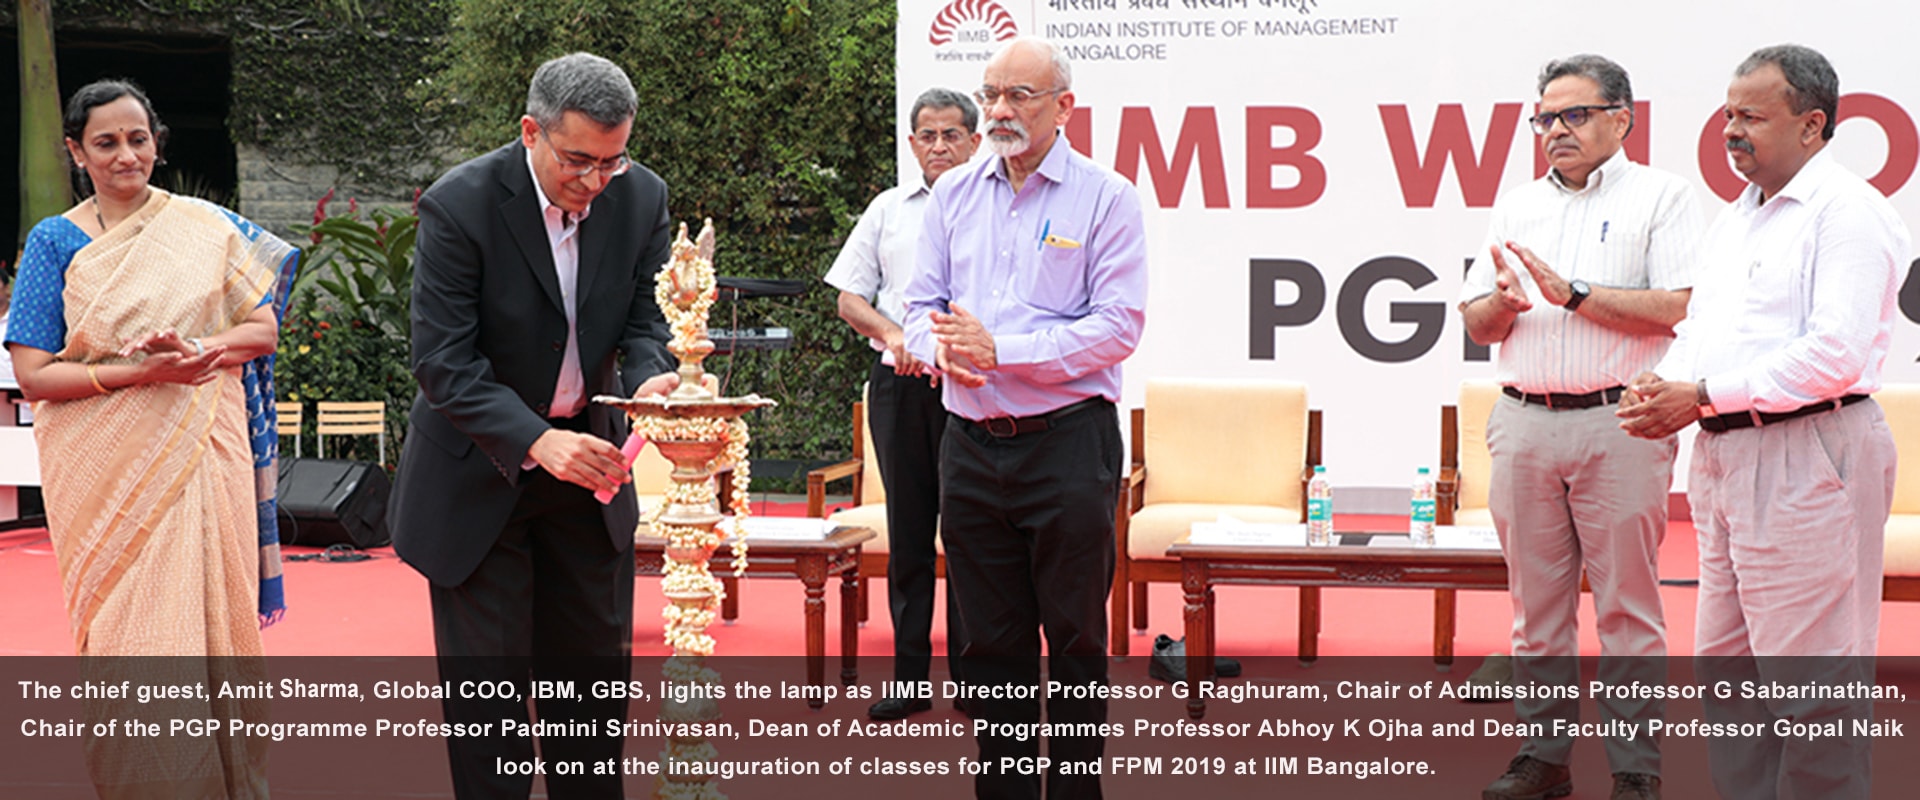 IIMB welcomes PGP & FPM students with an inauguration and orientation program from June 10-15